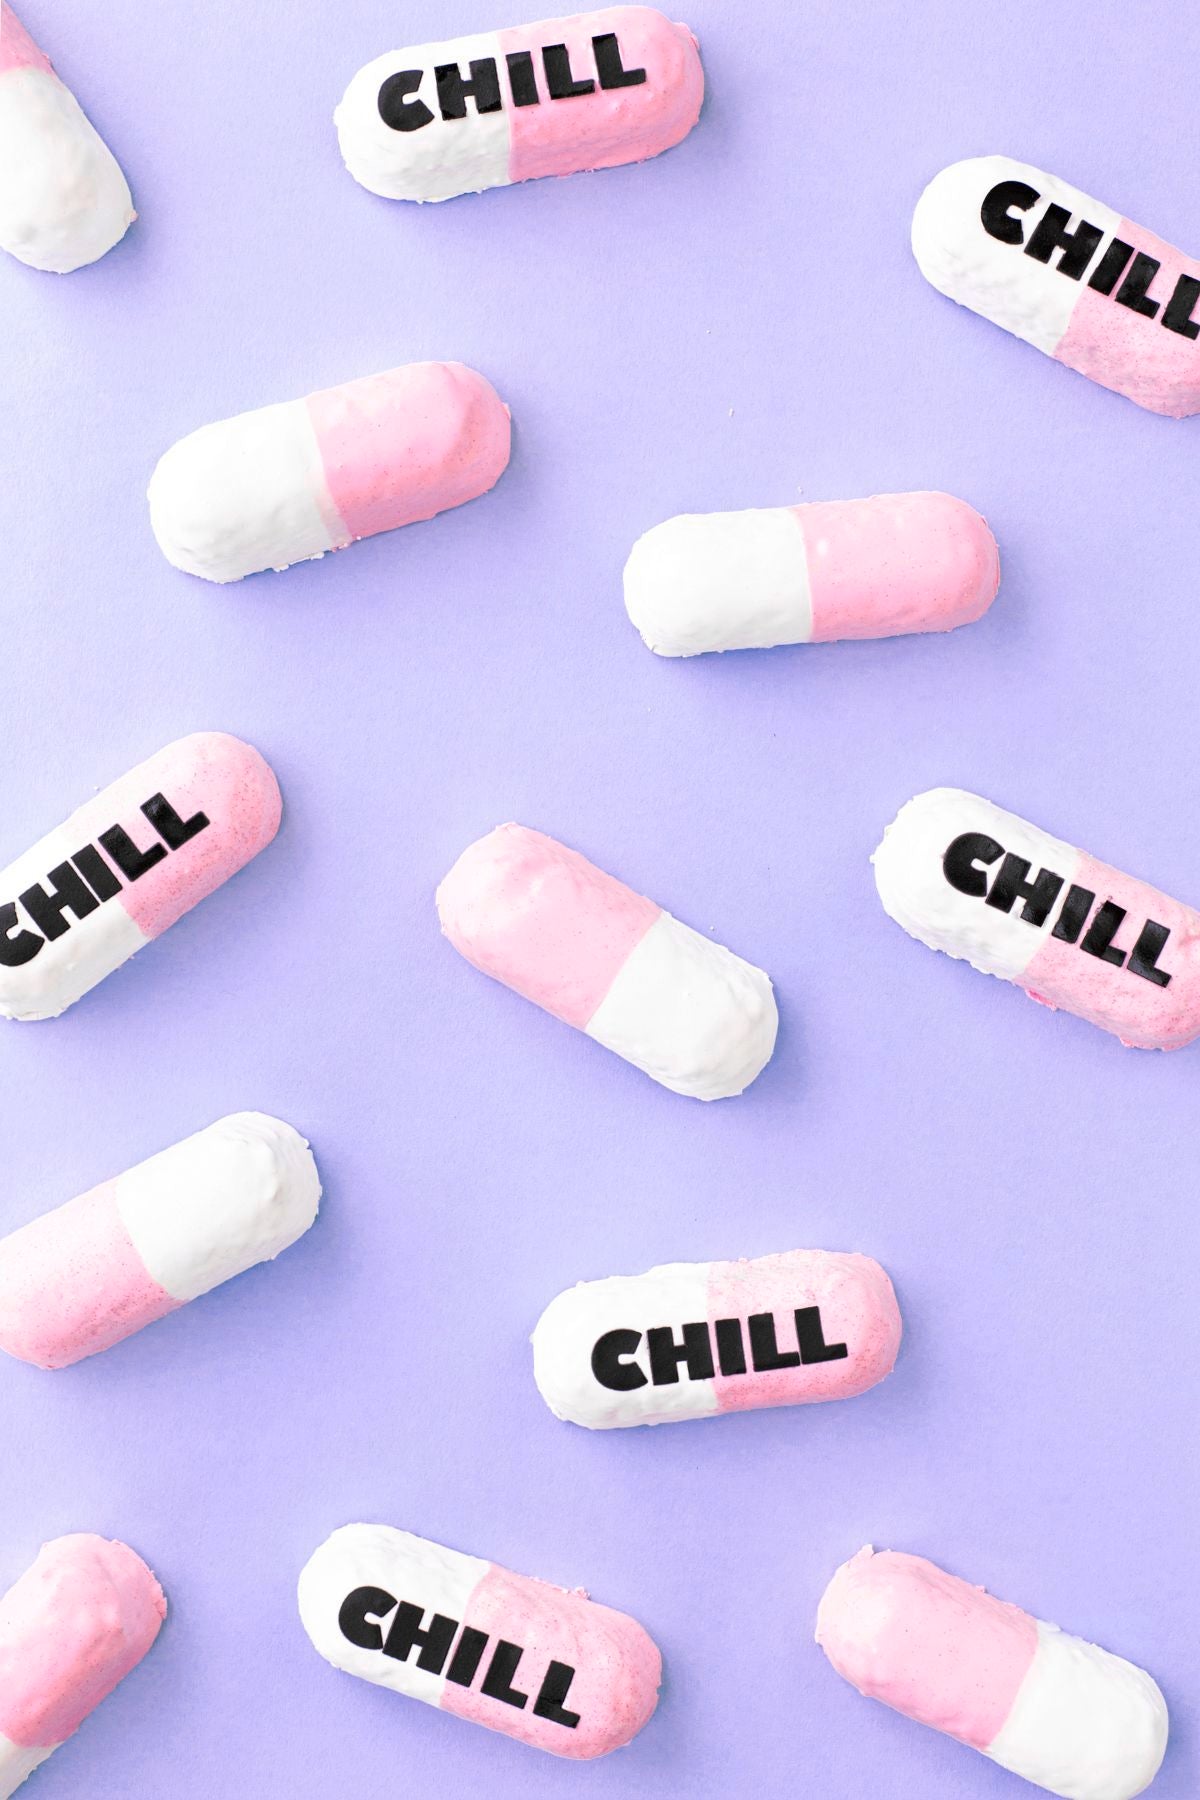 Chill Pill Bath Bomb Mold Set. 3 Sizes. Makes 2”, 2.5” And 3.25